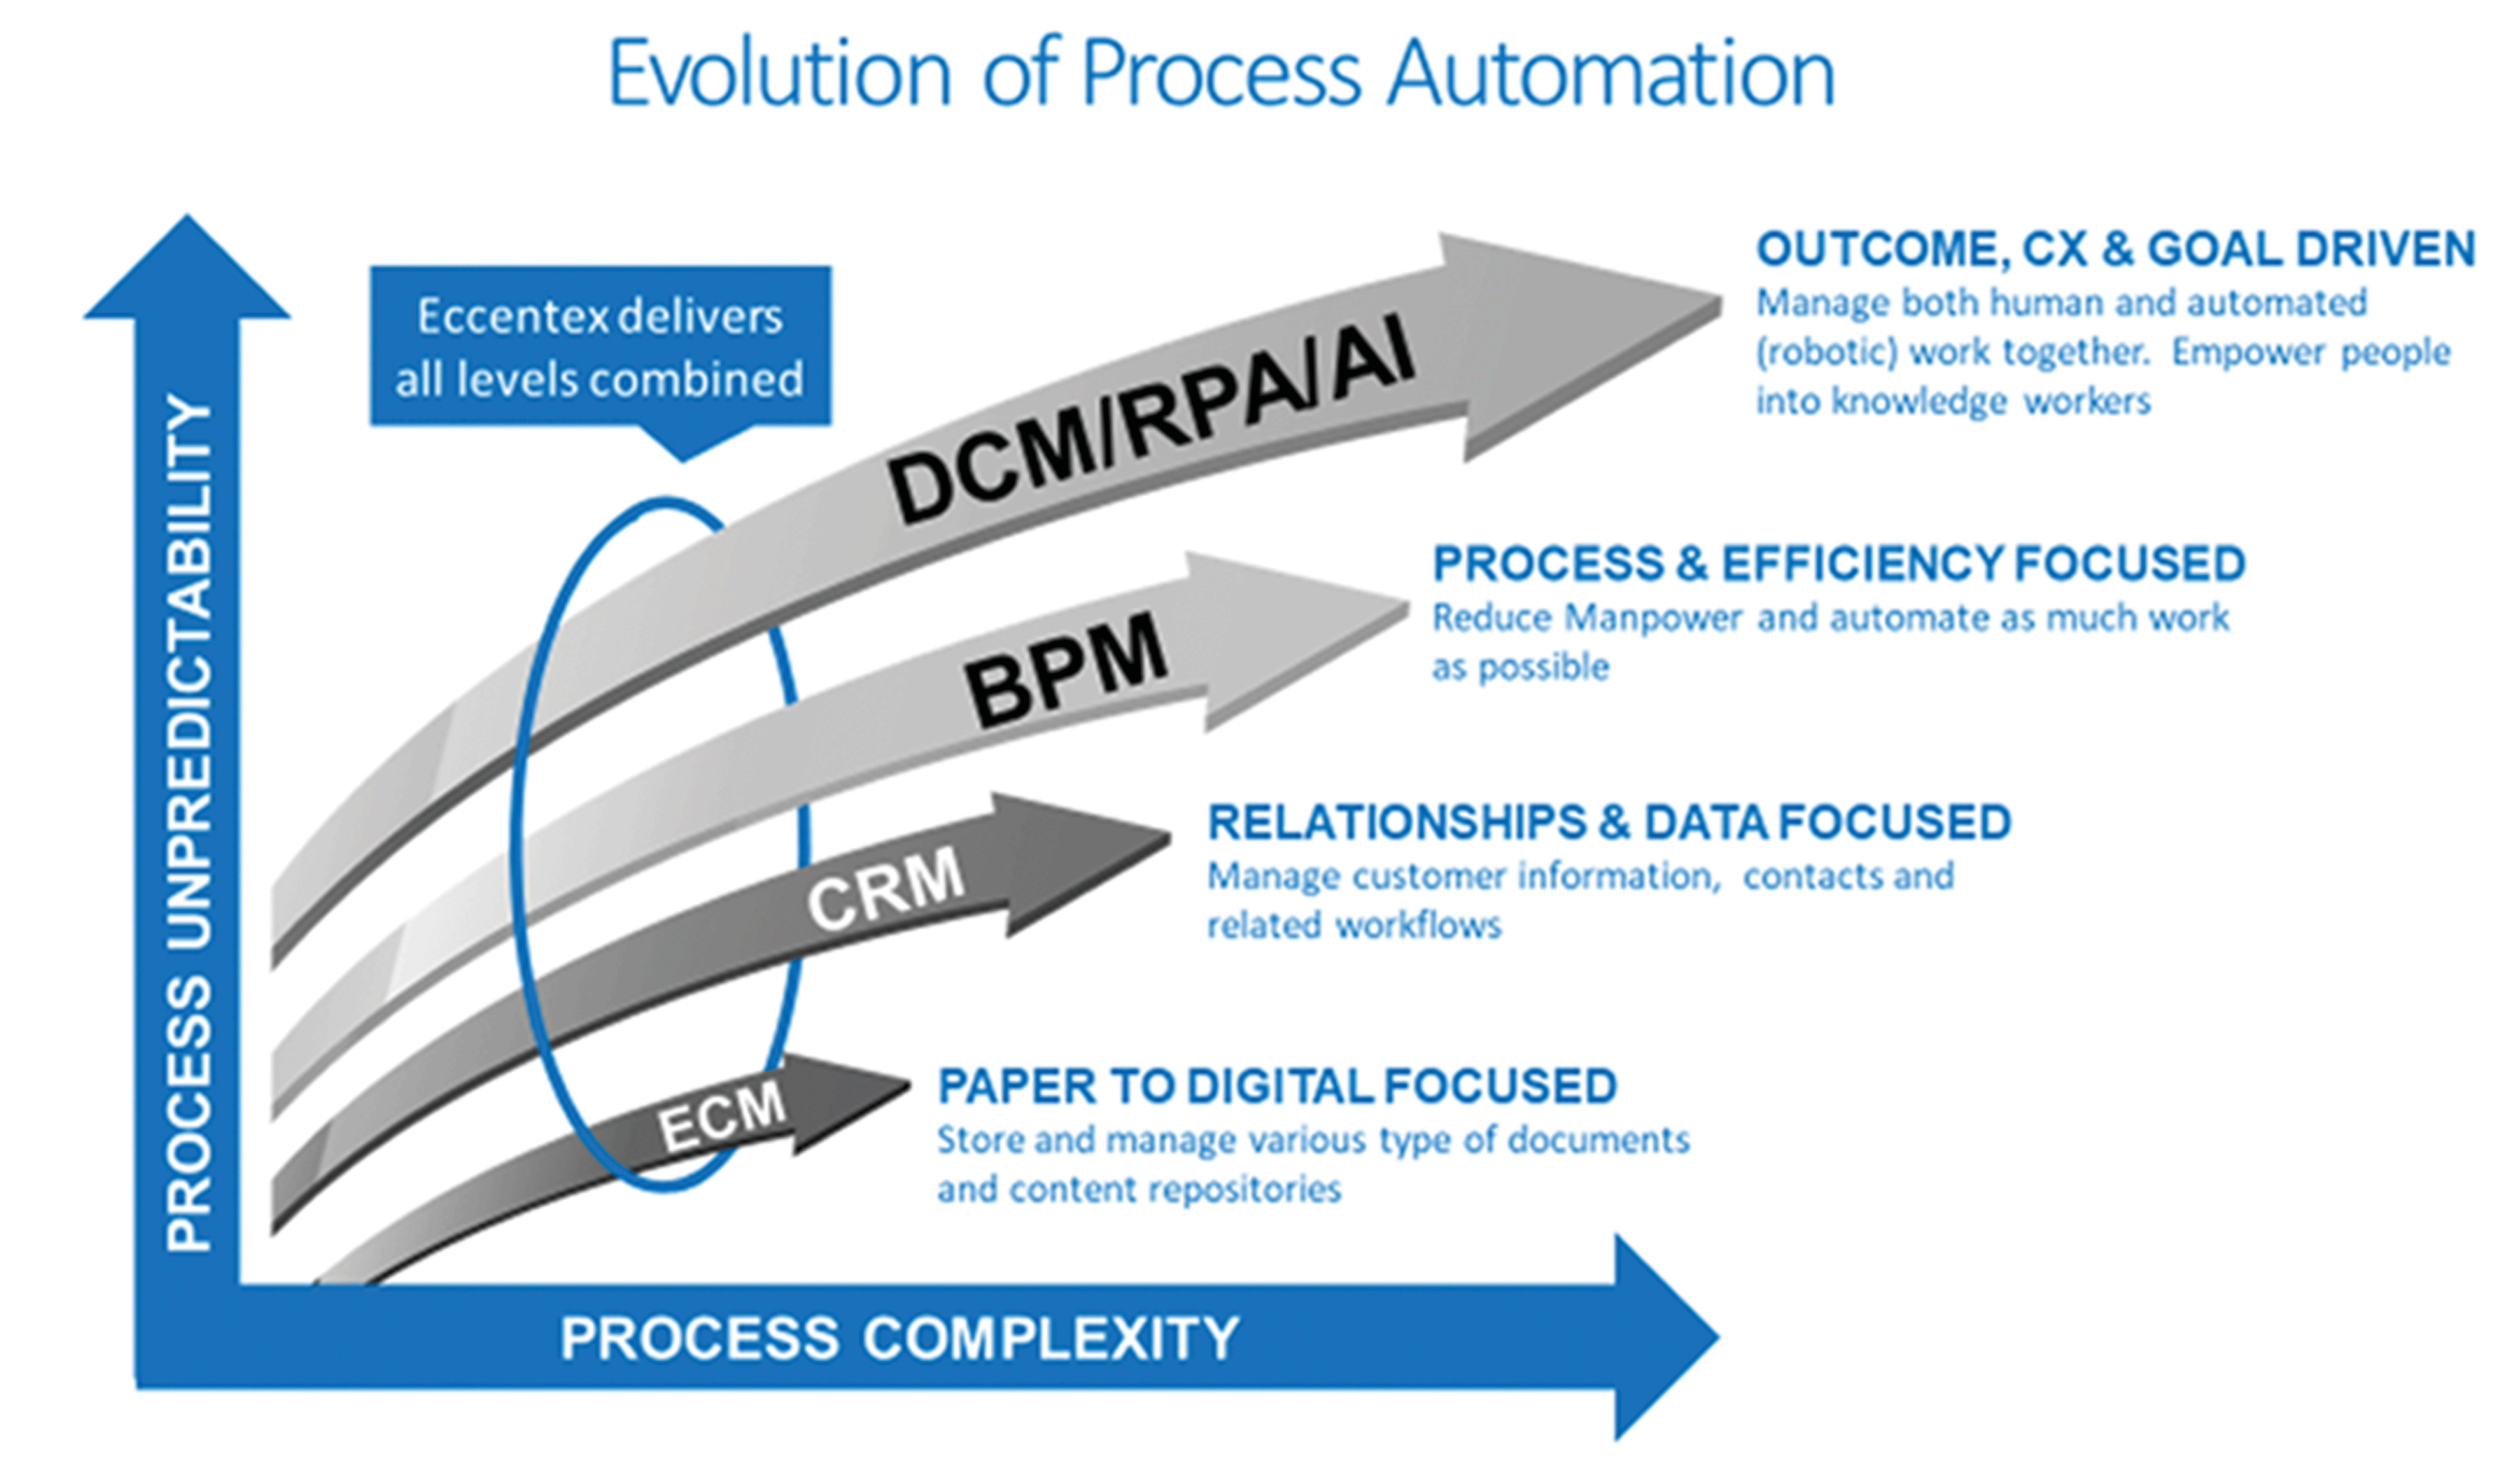 Evolution or Process Automation